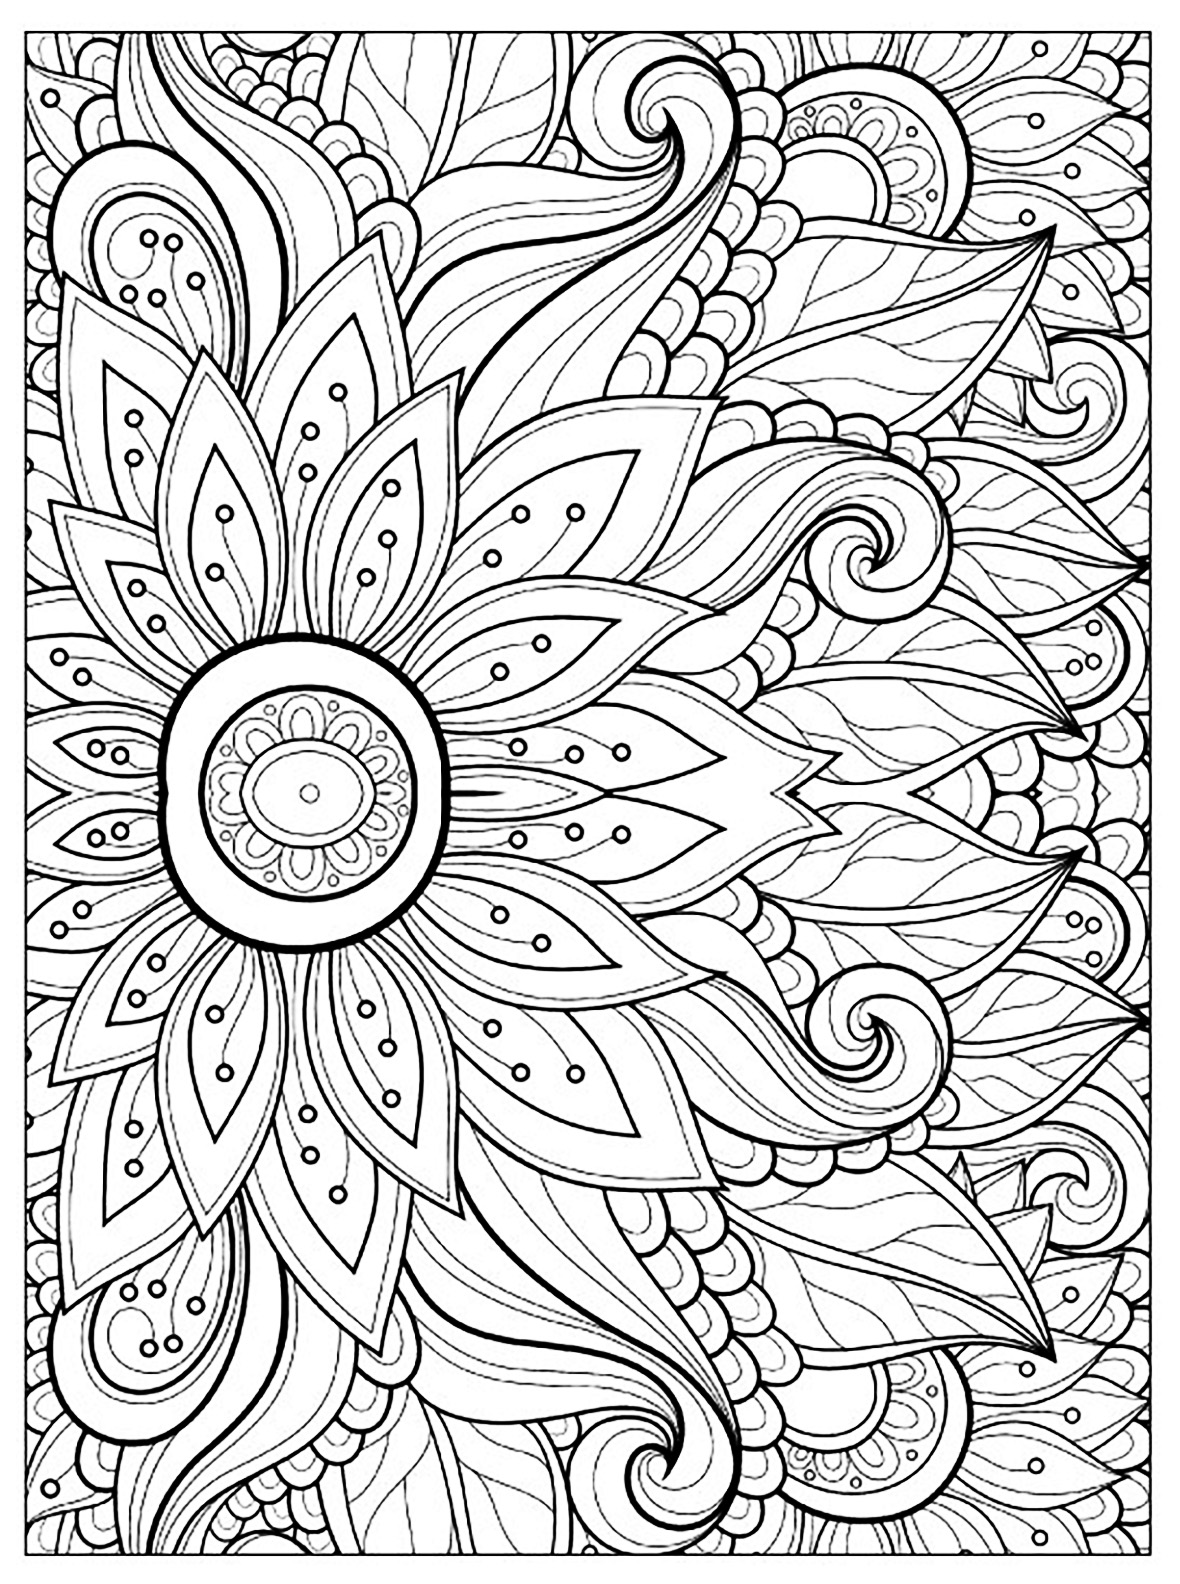 Preschool Simple Flower Coloring Pages / Flowers coloring pages for